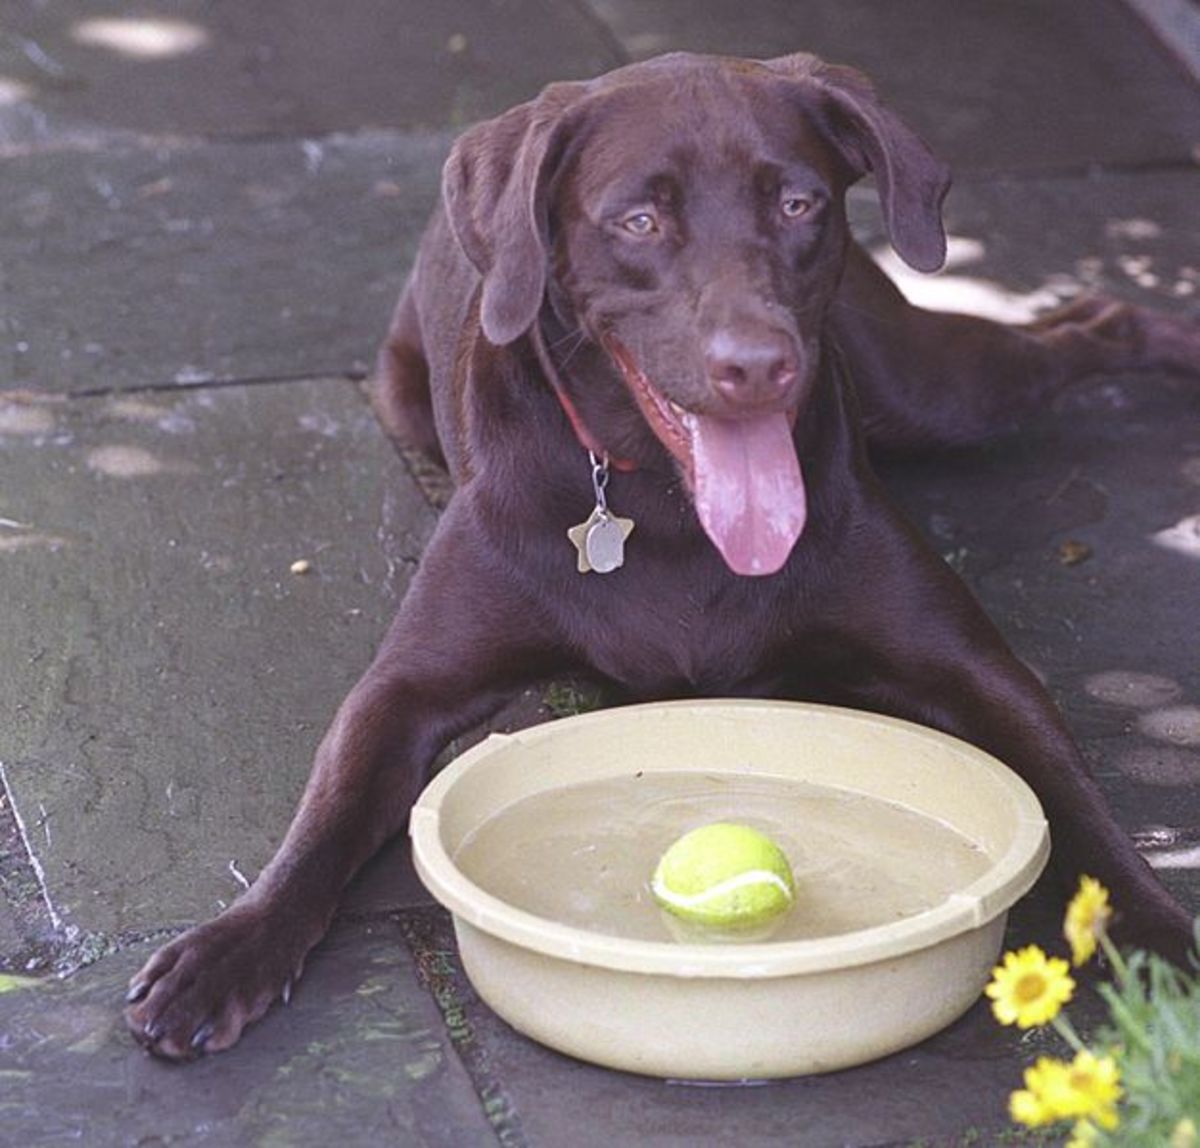 Always make sure your dog has access to a plentiful supply of fresh, clean water.